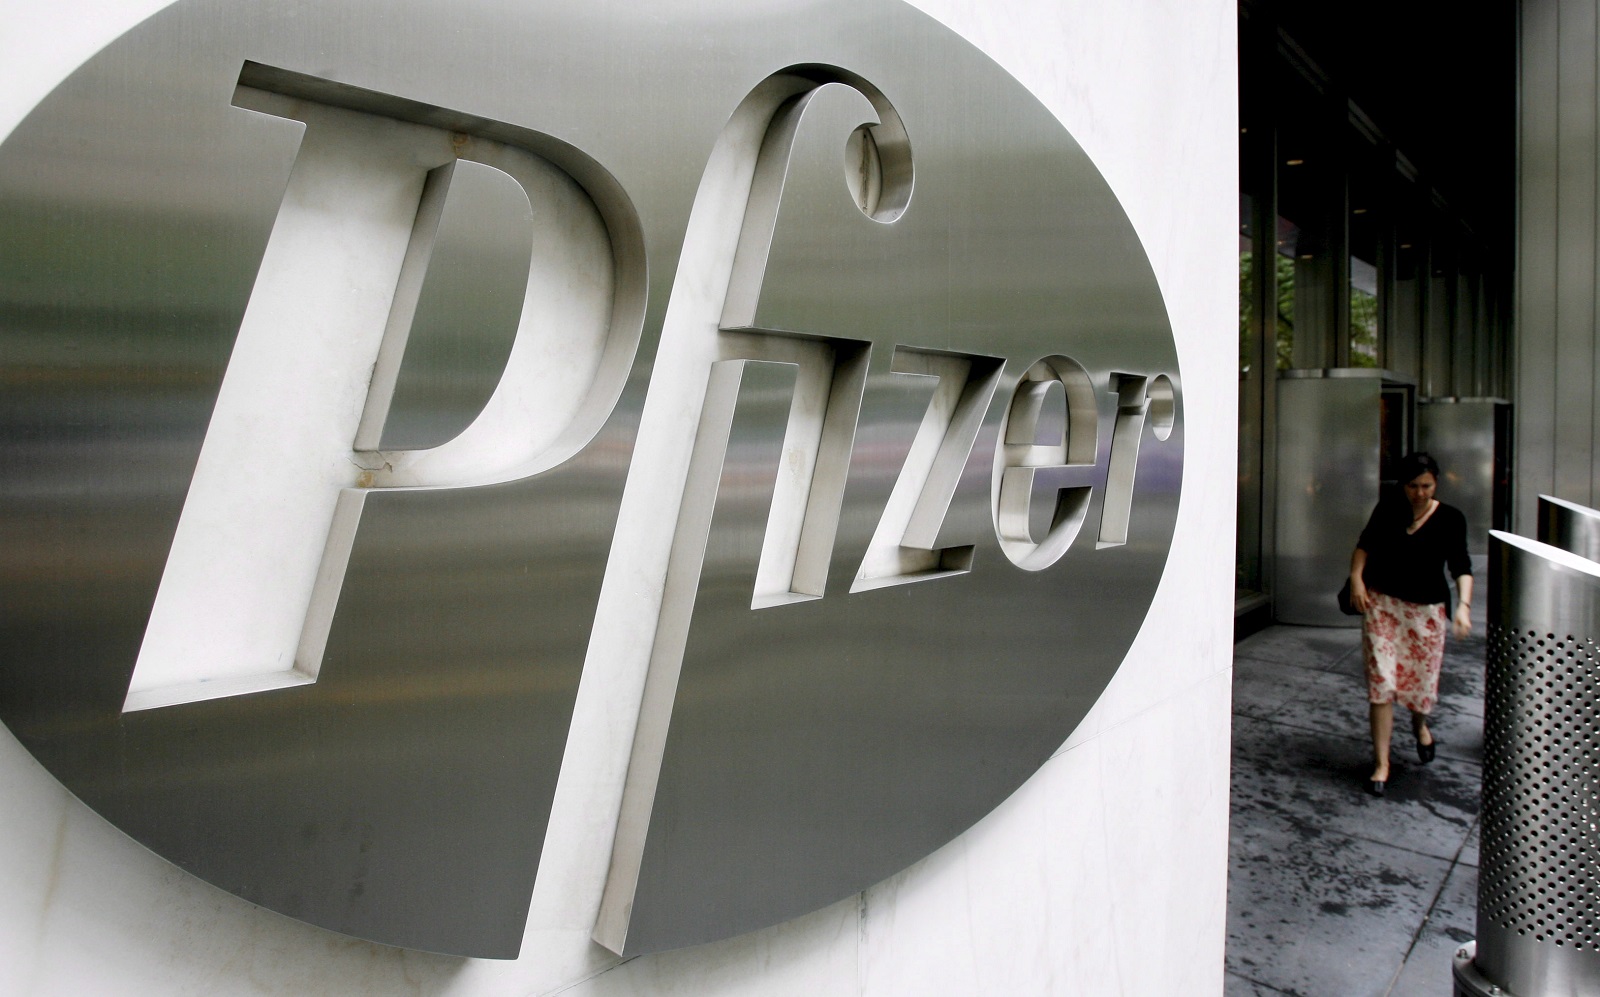 epa08980076 (FILE) - A file image dated 26 June 2006 showing a woman walking past a sign in front of the world headquarters building of Pfizer Inc. in New York, USA (reissued 01 February 2021). Pfizer is due to release its 4th quarter 2020 results on 02 February 2021.  EPA/JUSTIN LANE *** Local Caption *** 52754641